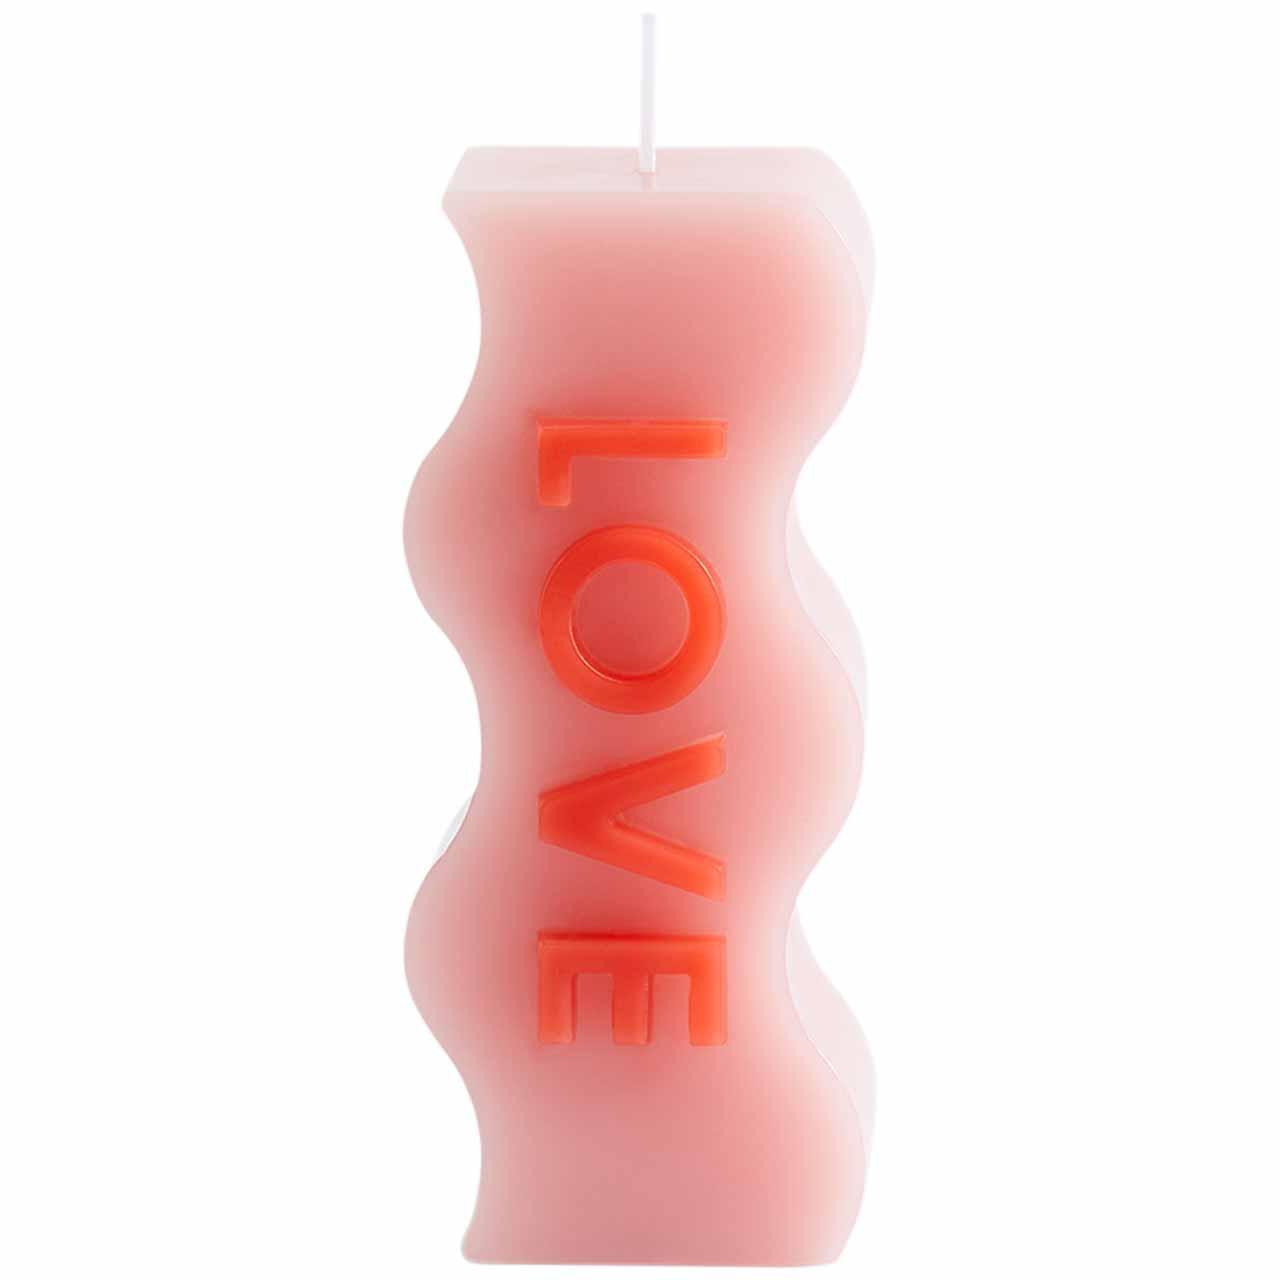 M&S Love Candle